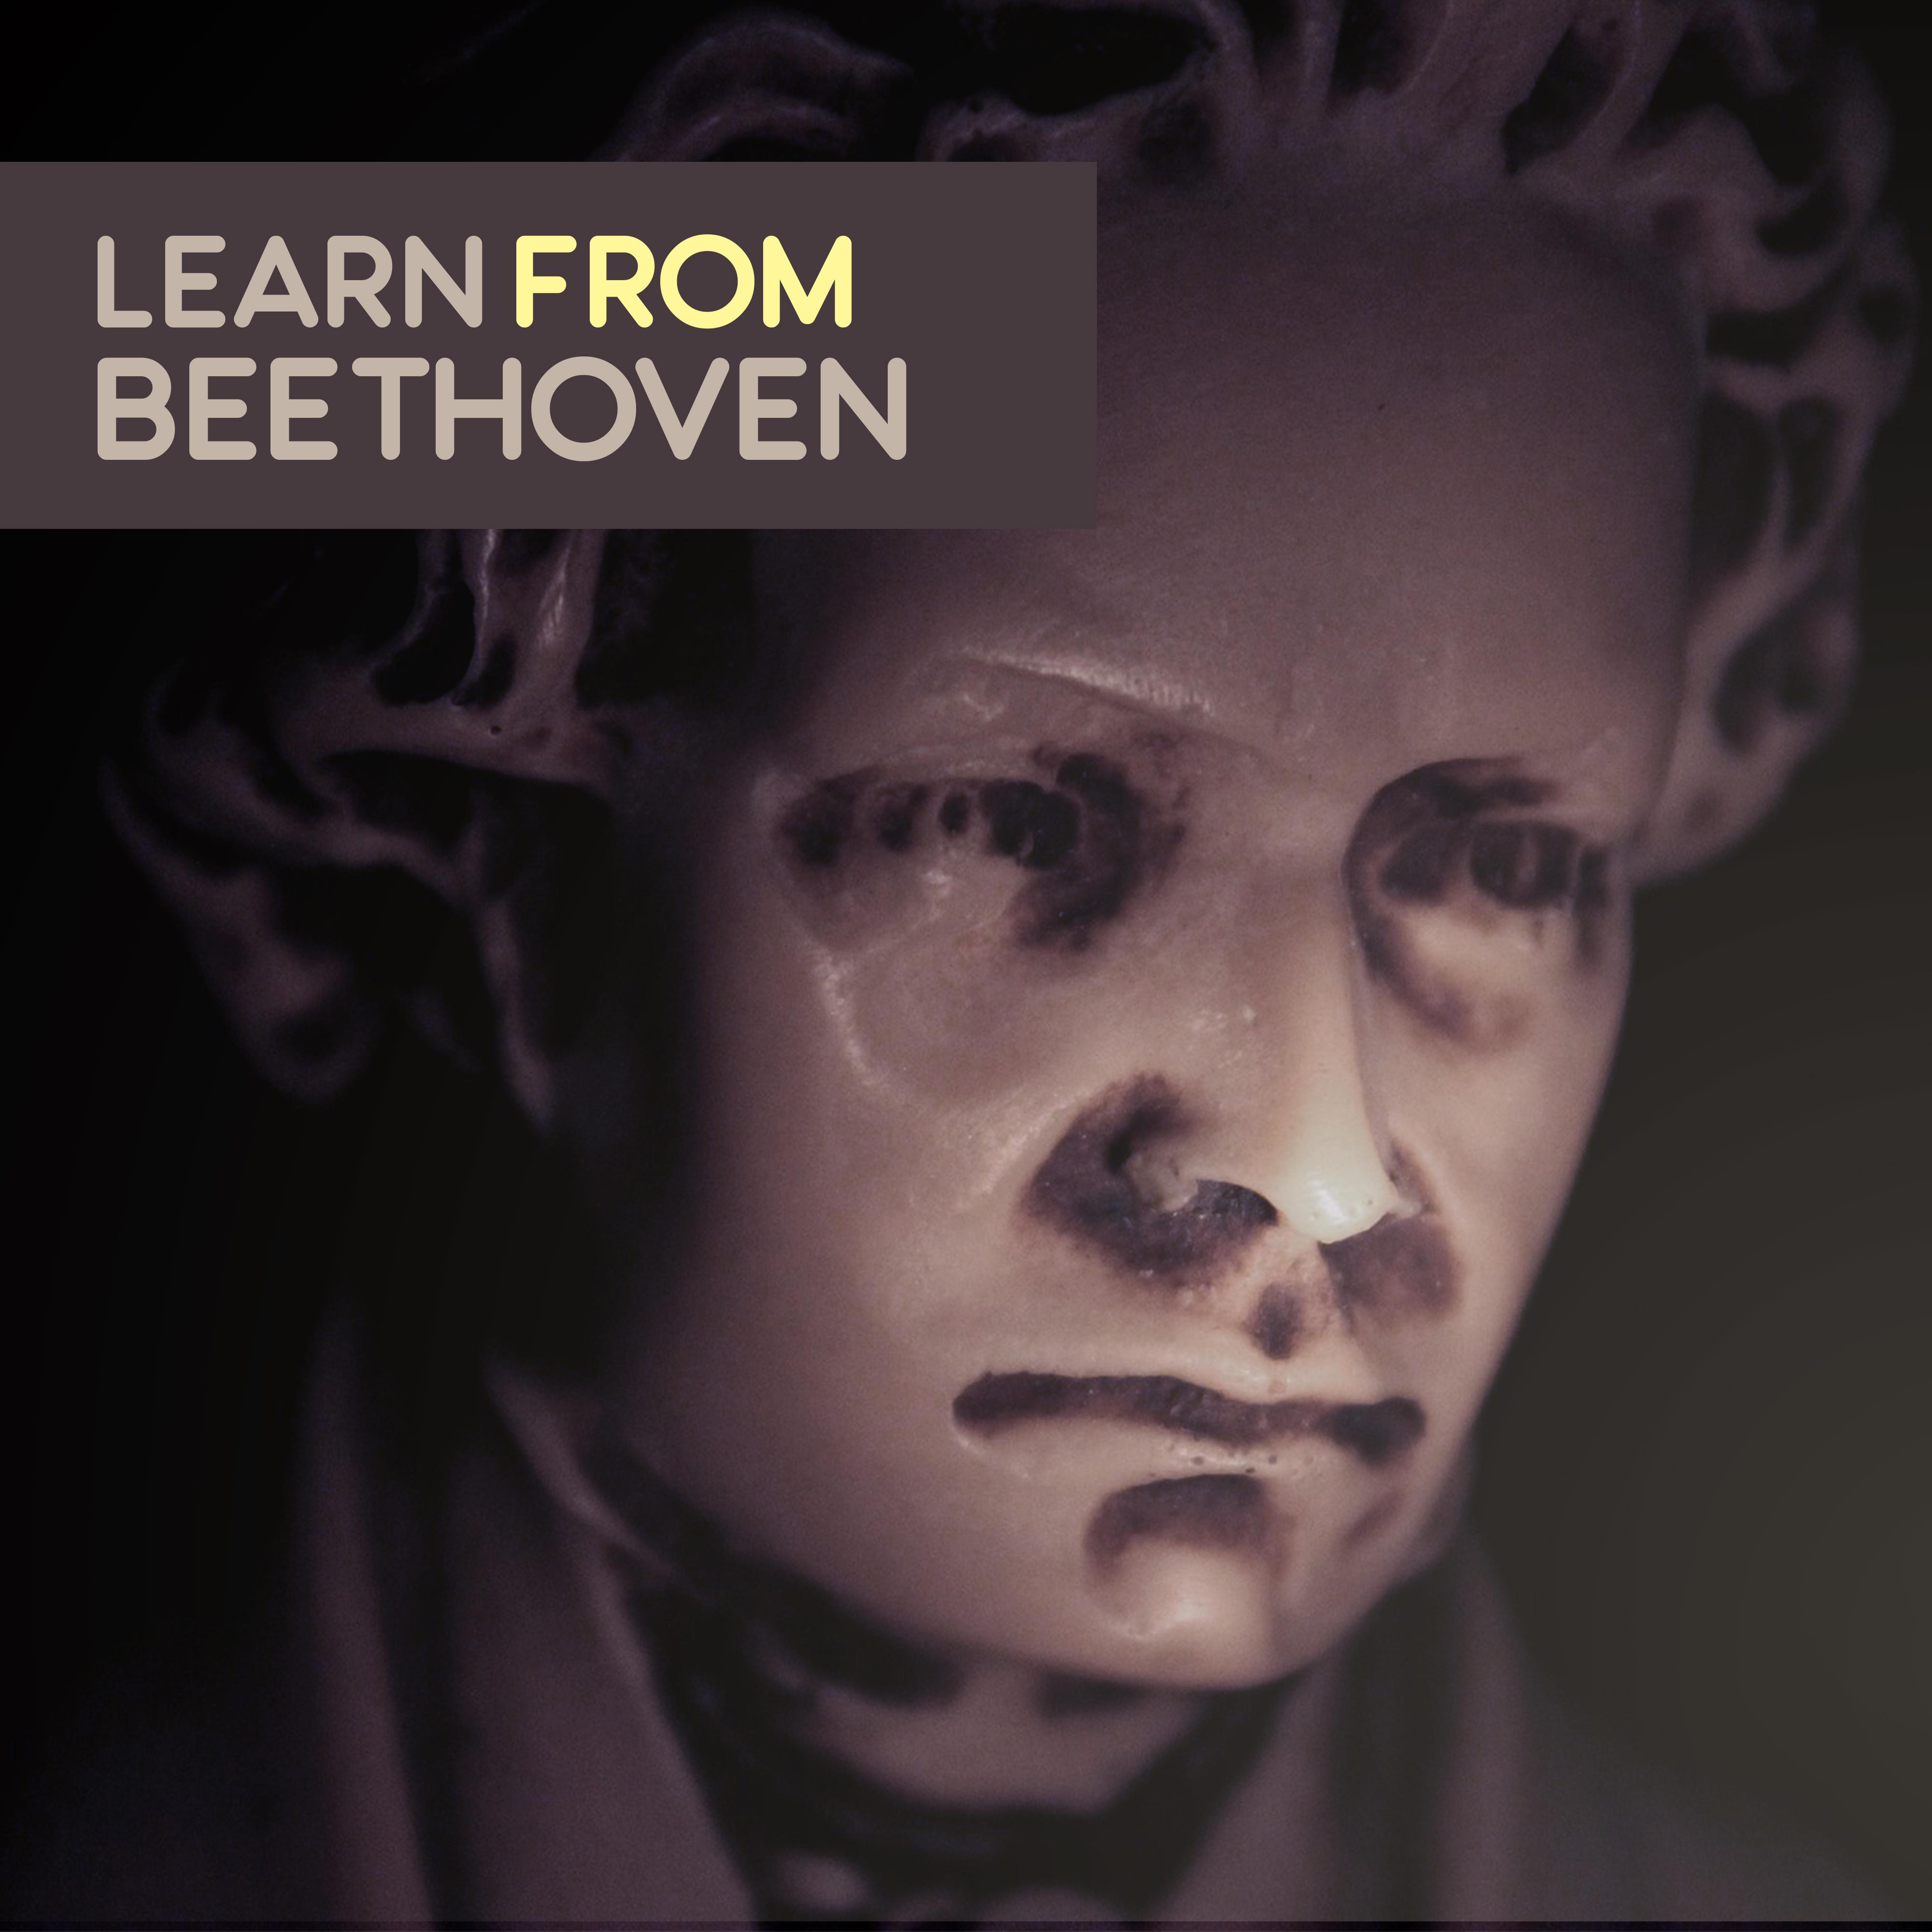 Learn from Beethoven  Studying Music, Focus, Stress Relief, Music Helps Pass Exam, Easy Work